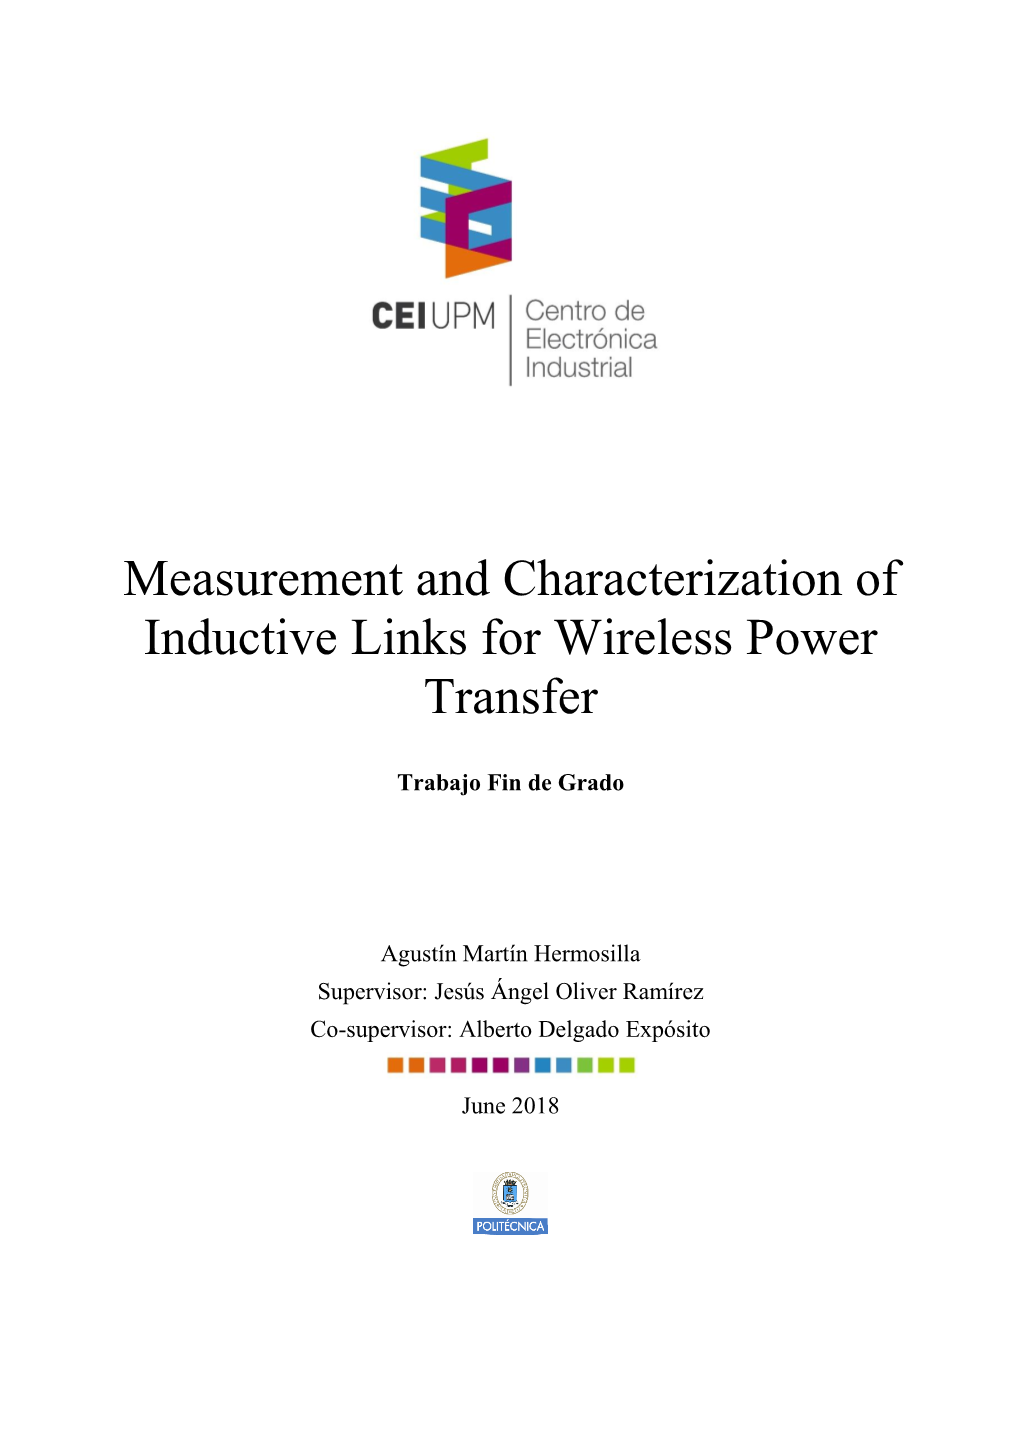 Measurement and Characterization of Inductive Links for Wireless Power Transfer